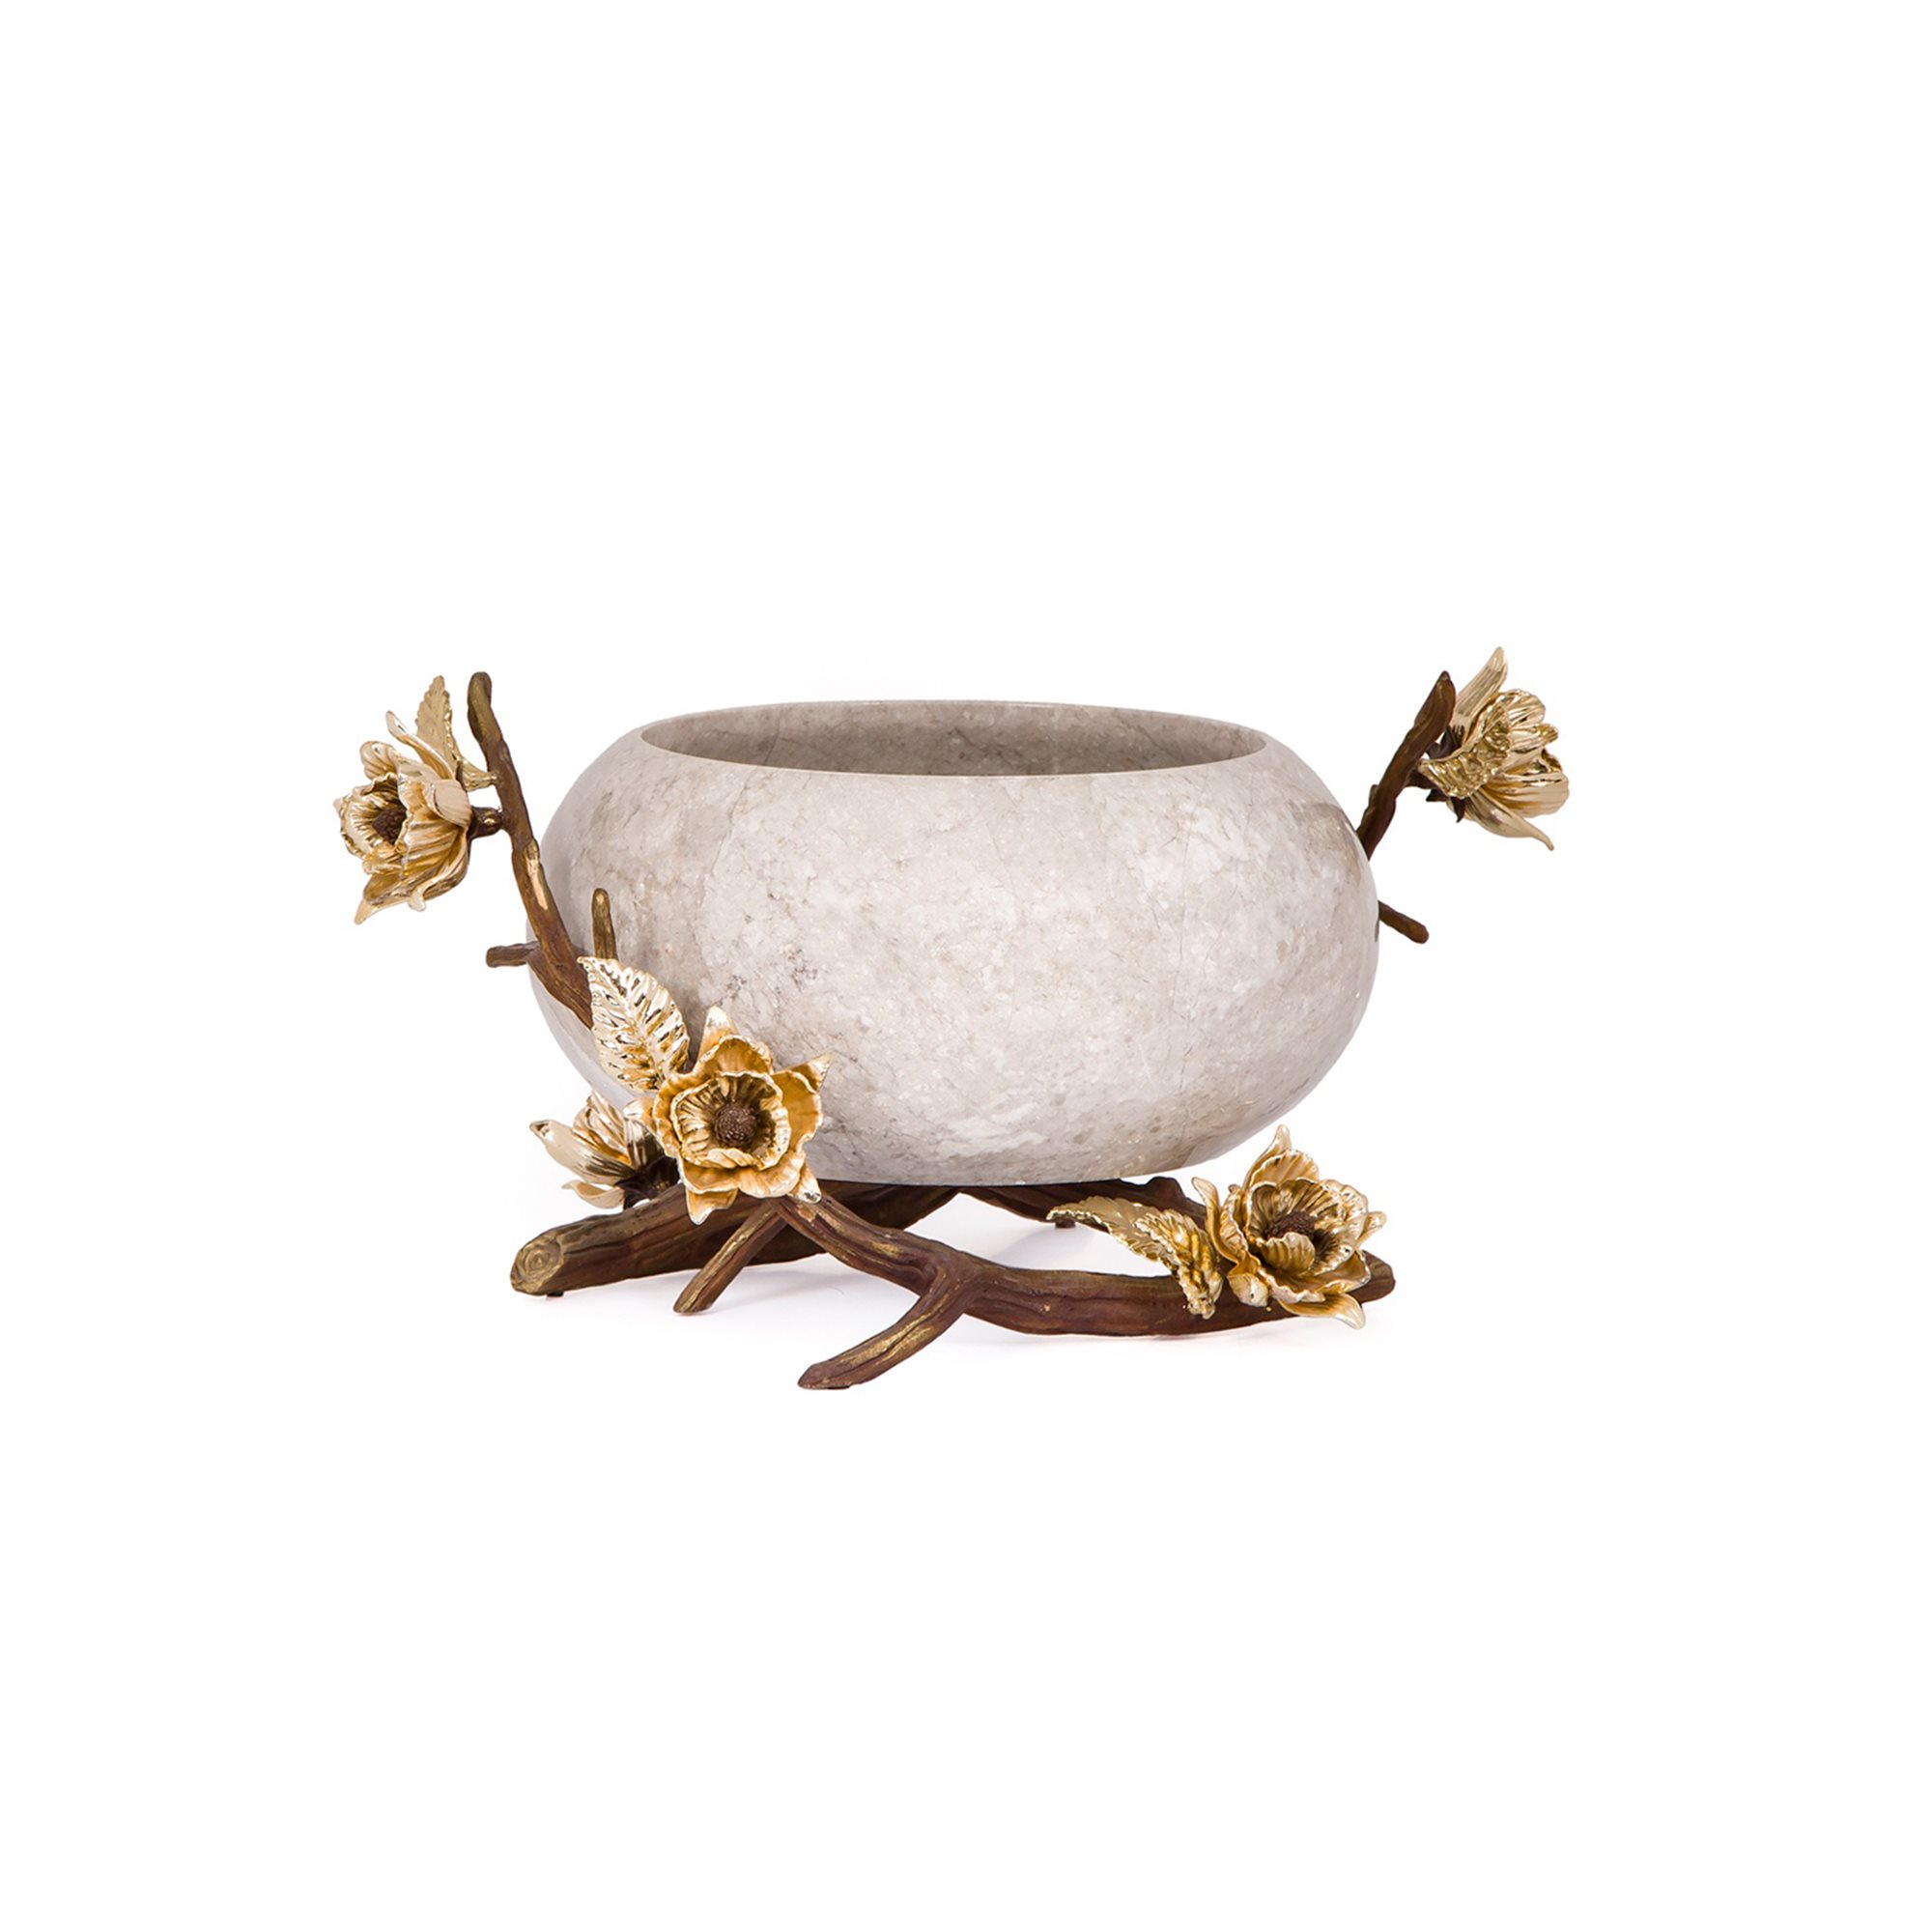 Anika Stone Serving Bowl - Double Branches (Size C3)